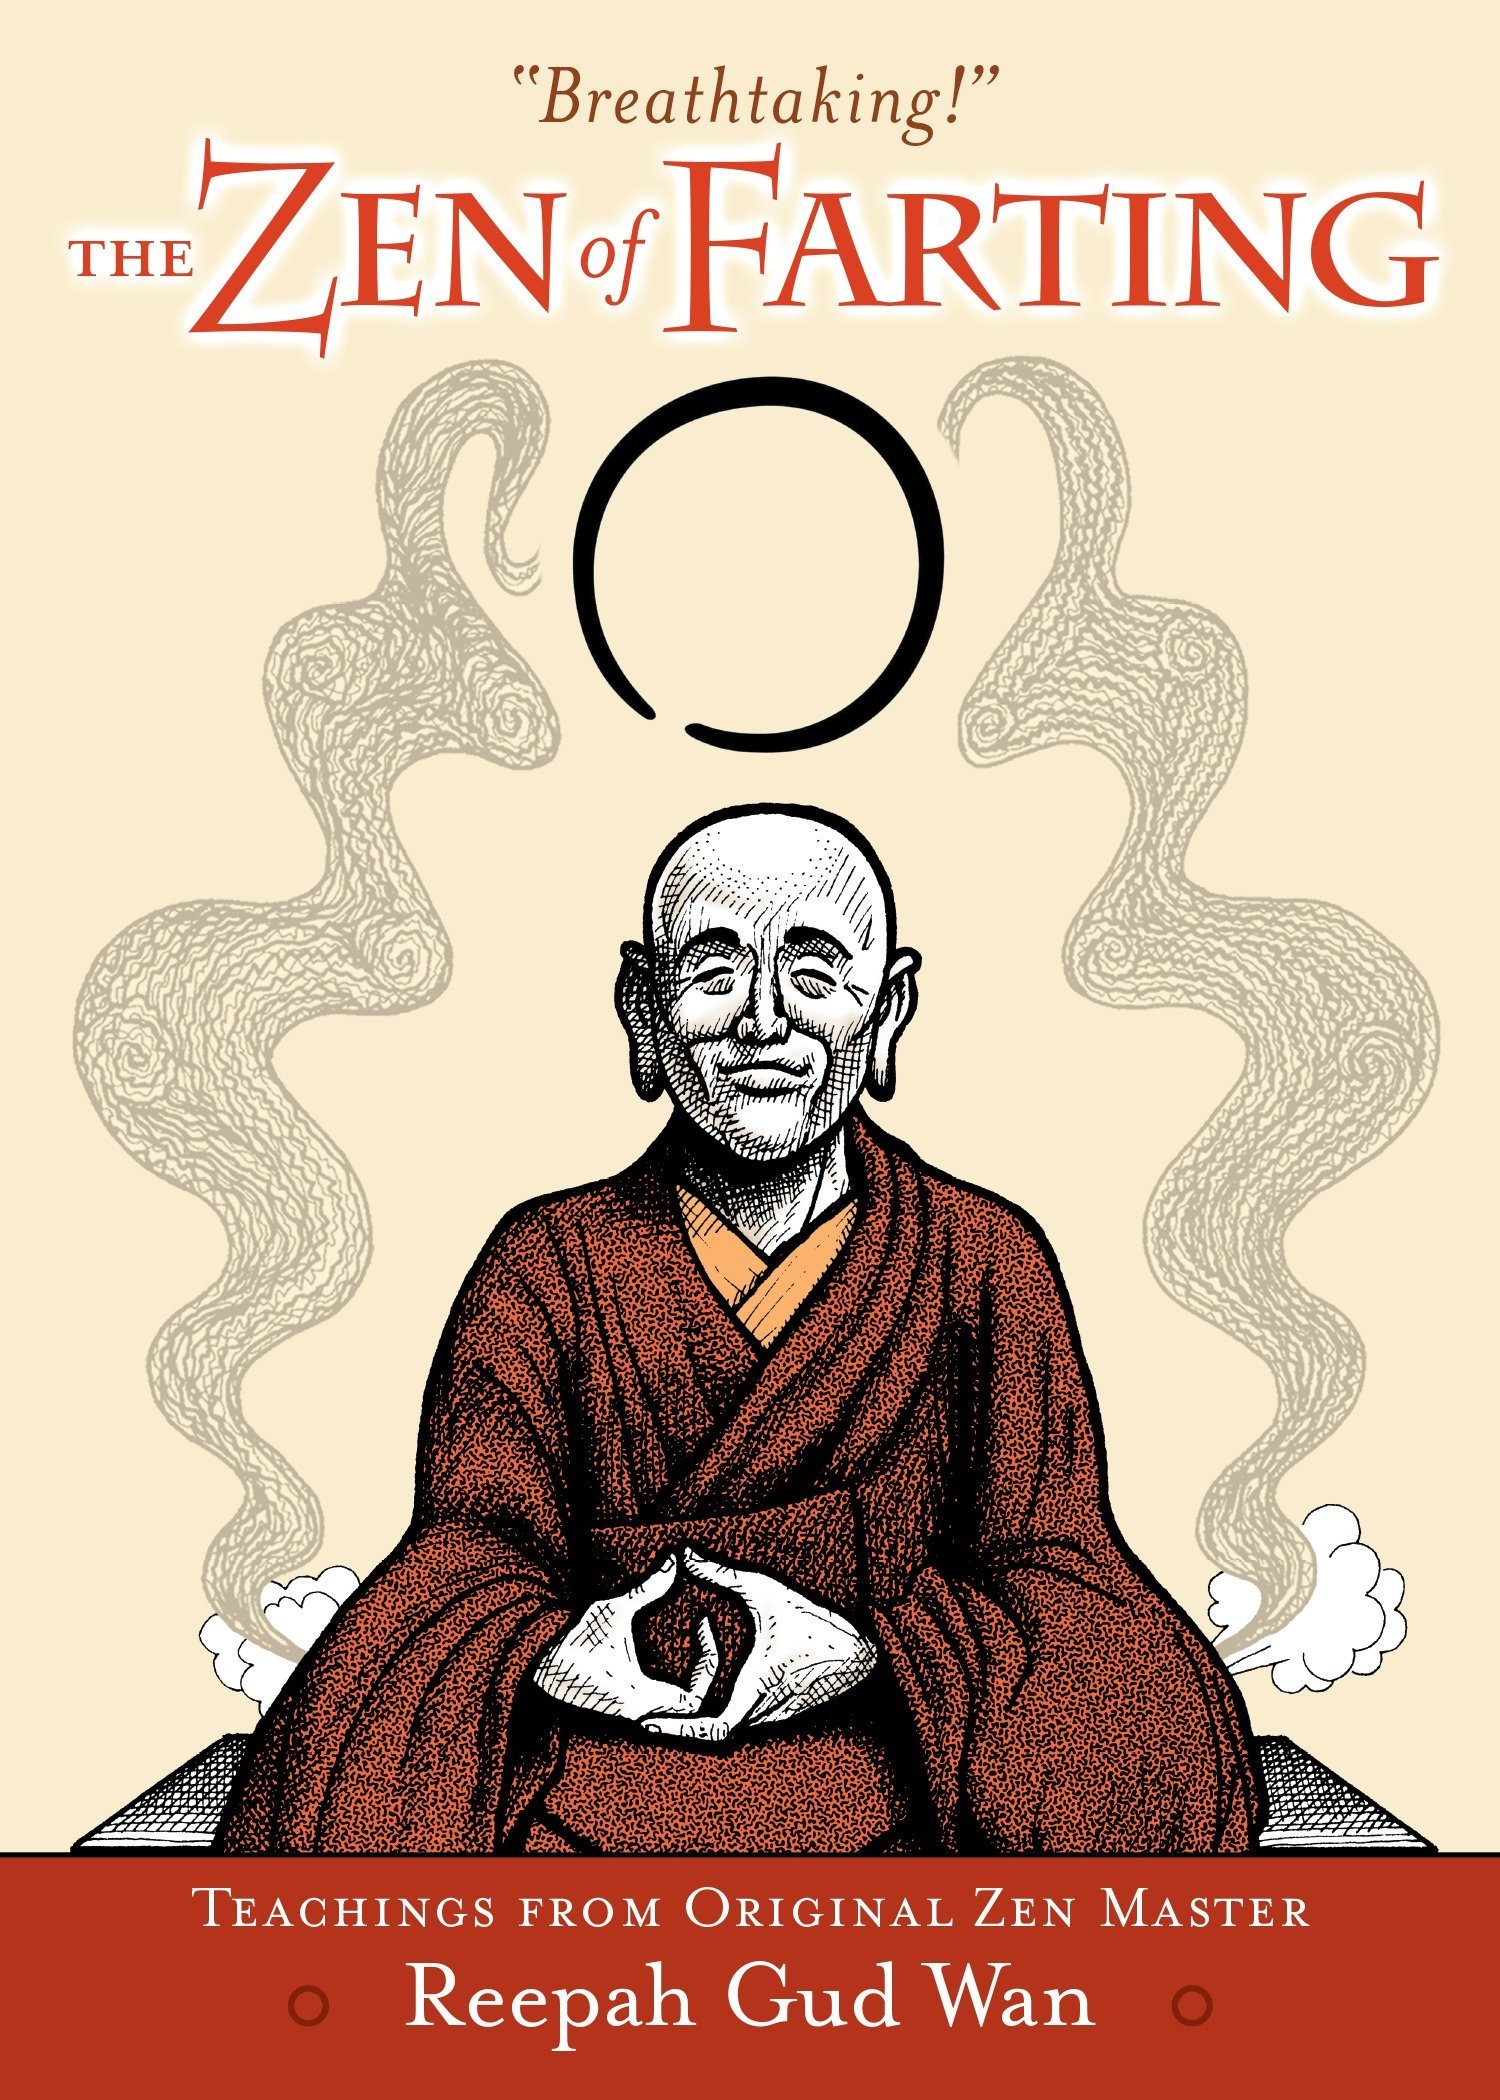 'The Zen of Farting' by Carl Japikse